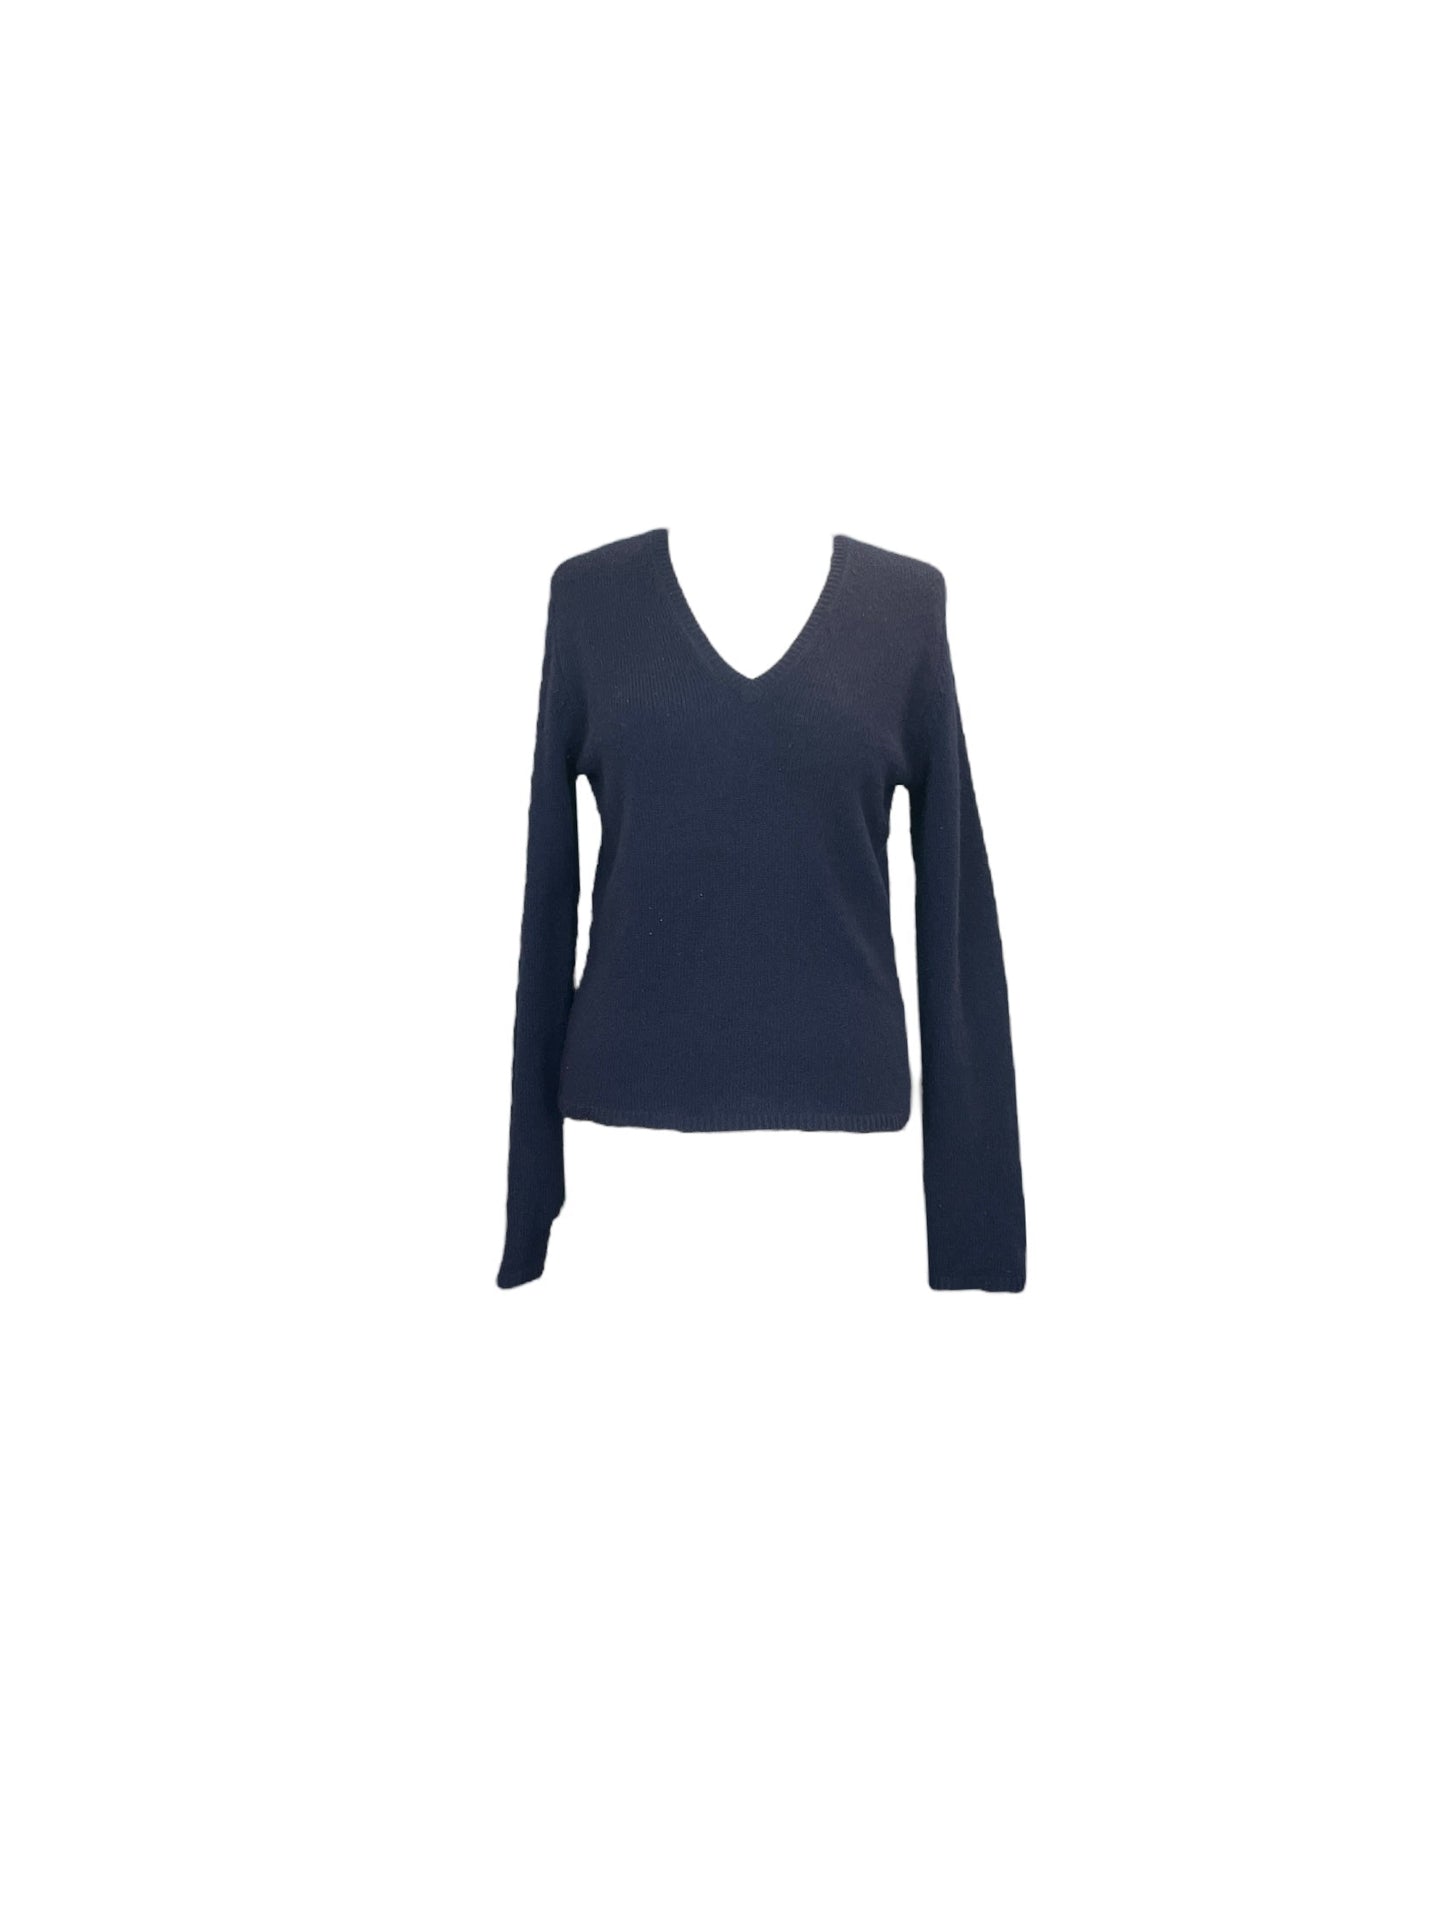 Womens 100% Cashmere Sweater - S